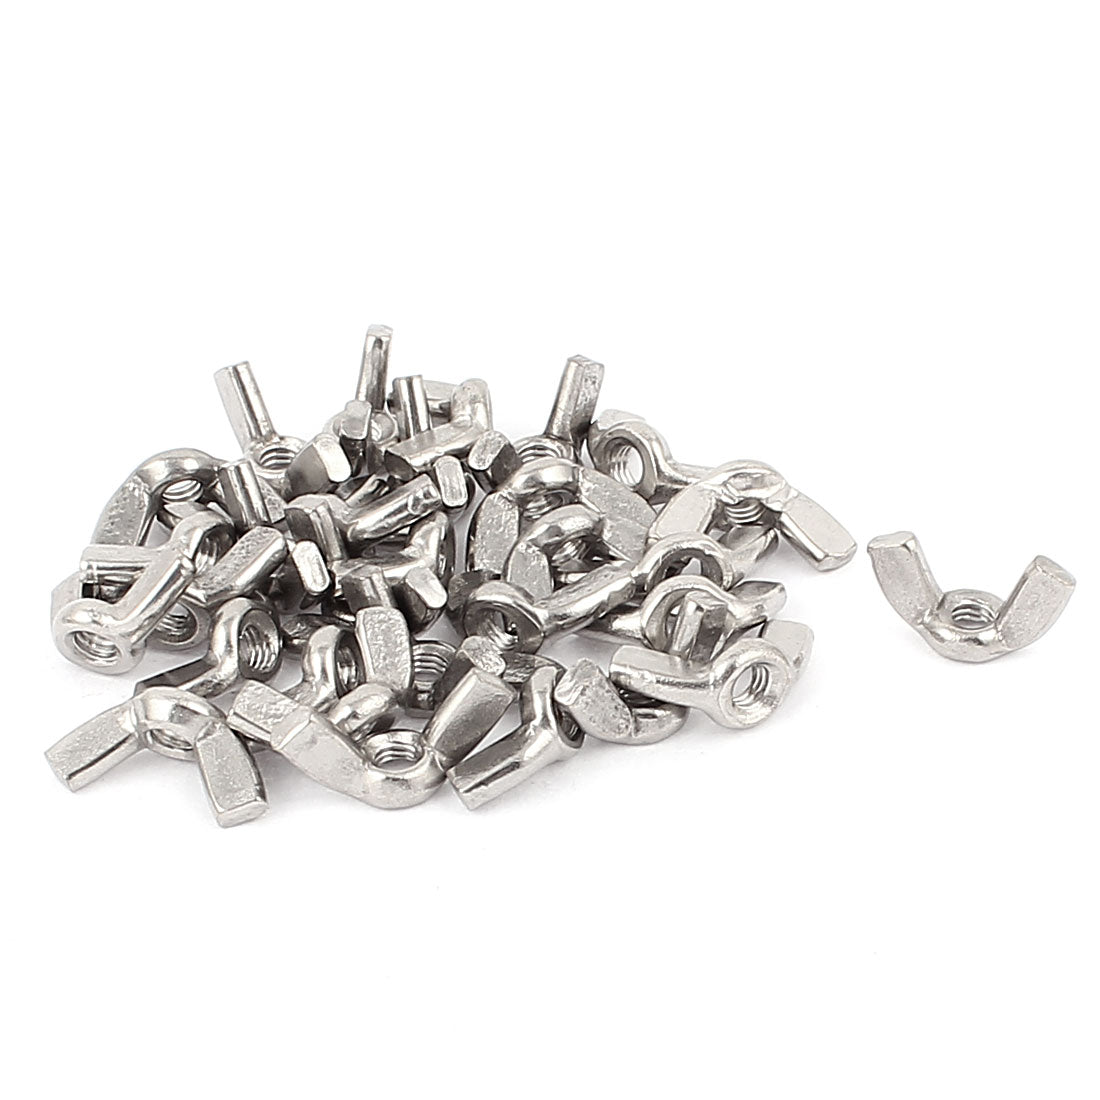 Uxcell Uxcell 30pcs M6 6mm Stainless Steel Wingnuts Butterfly Wing Nut Silver Tone